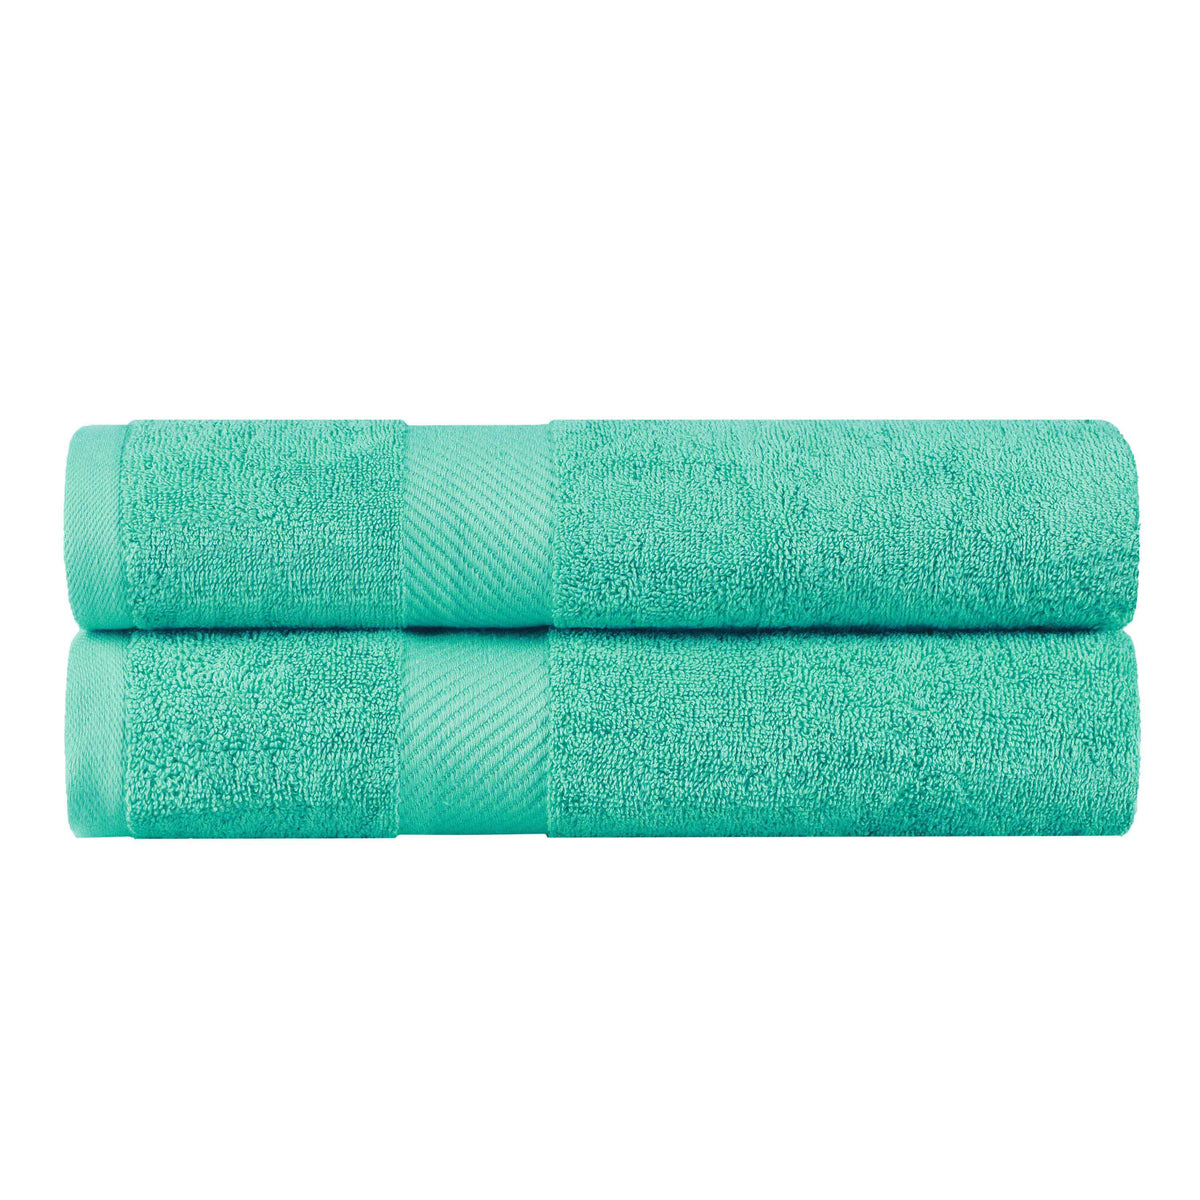 Kendell Egyptian Cotton Solid Medium Weight Bath Towel Set of 2 - SeaGreen